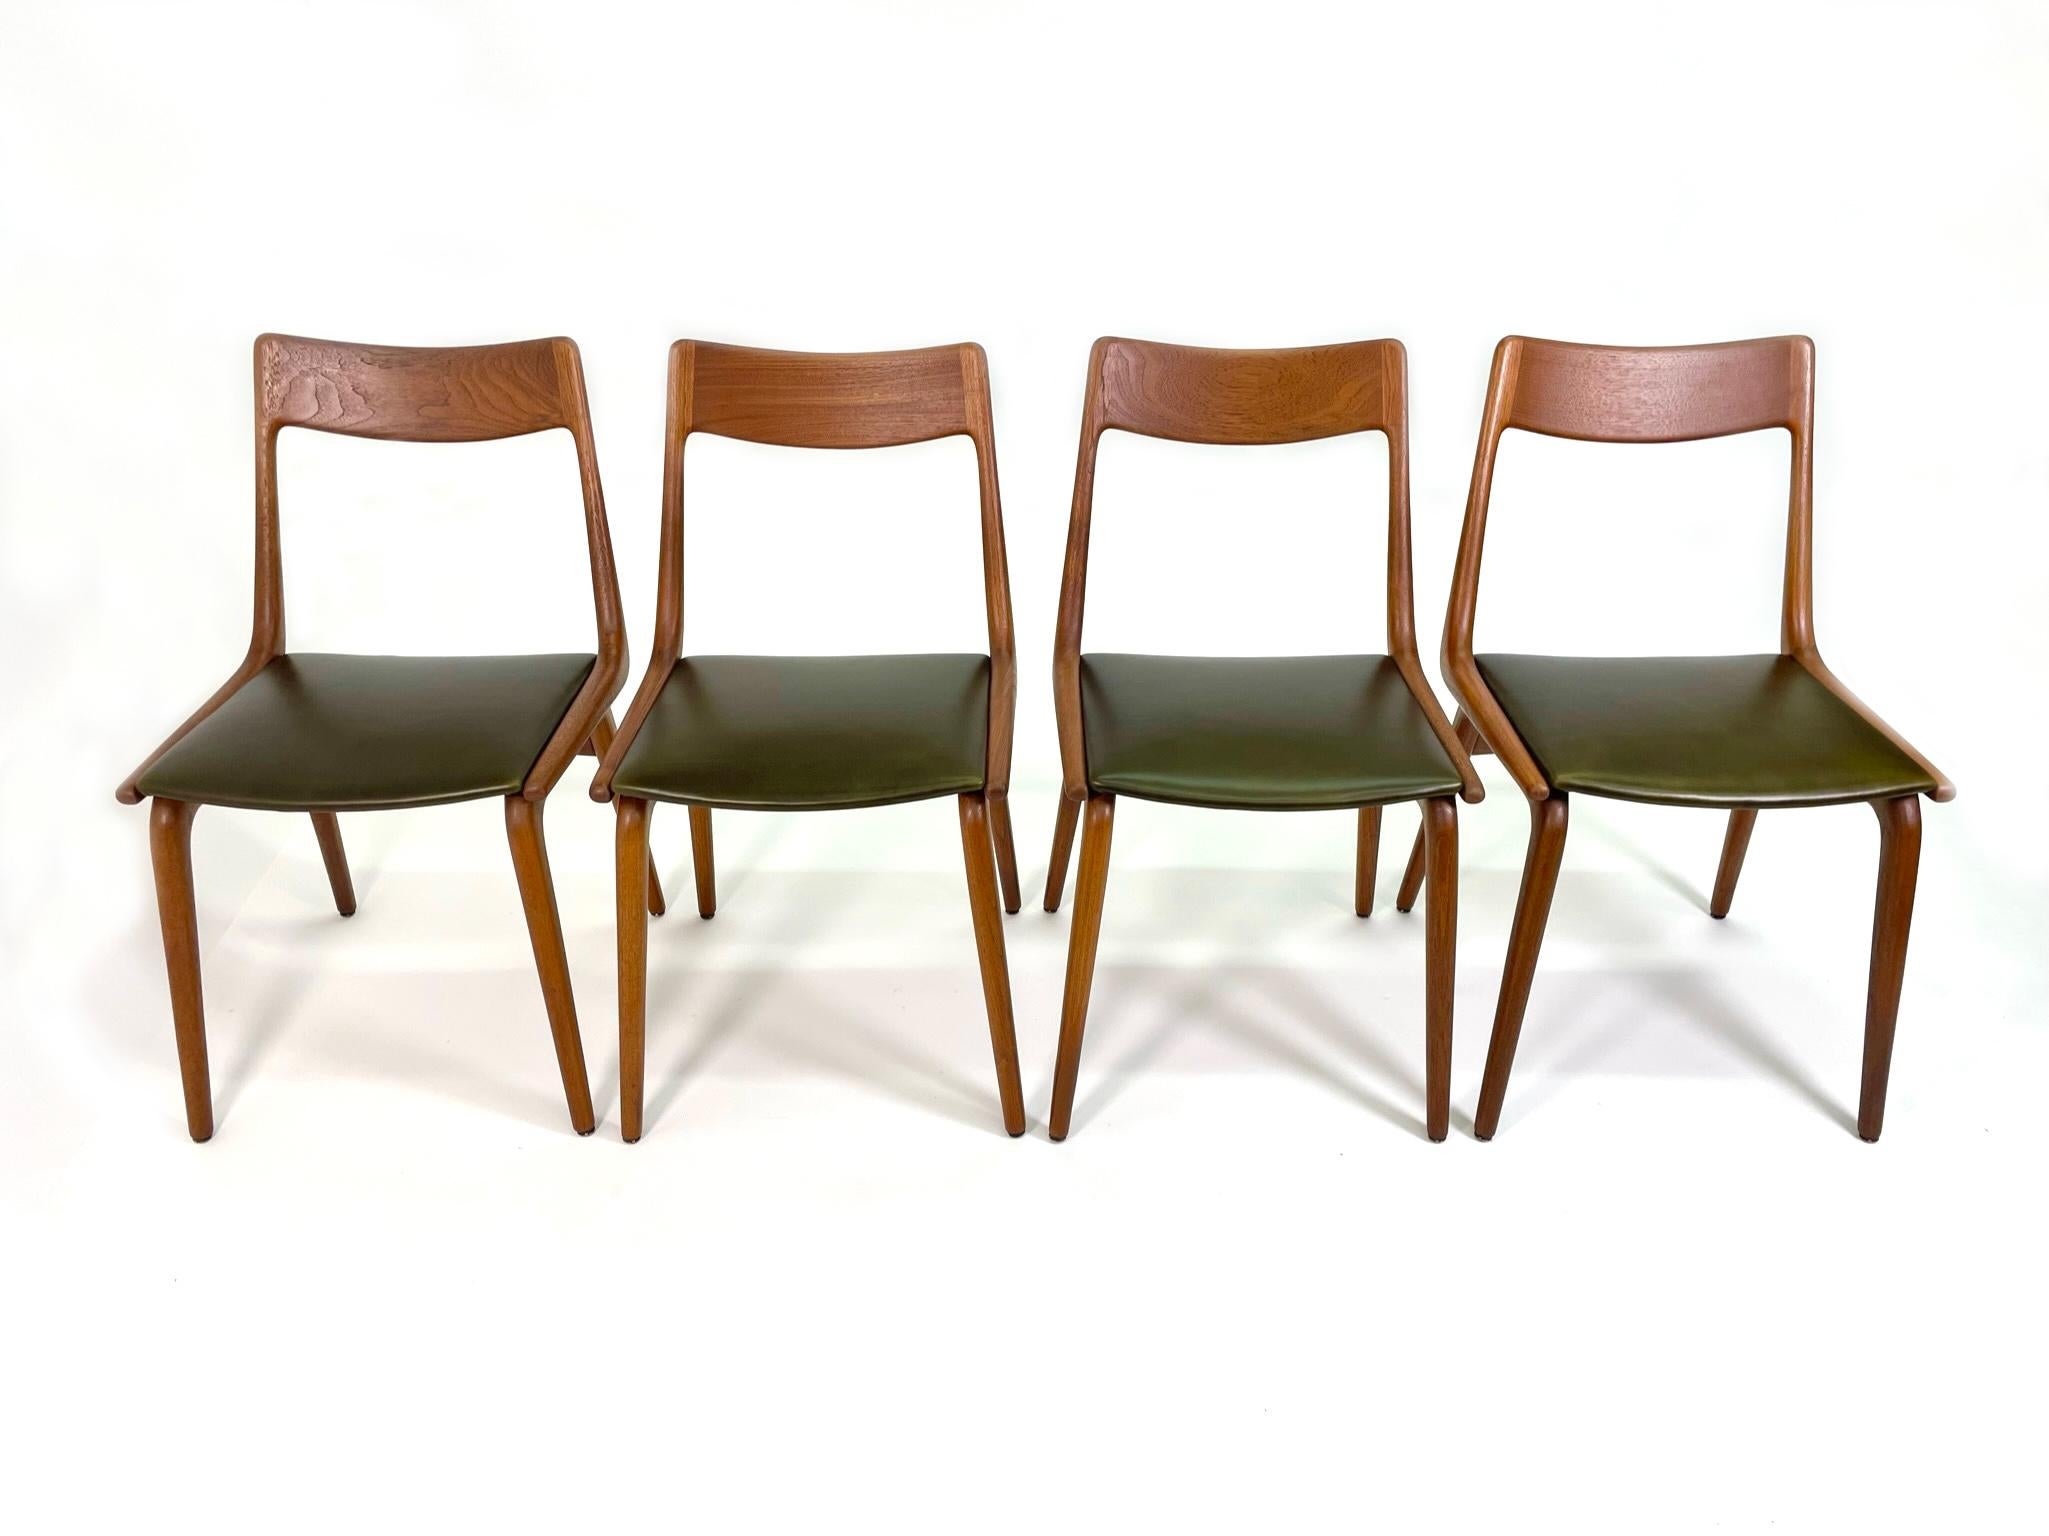 We have just reupholstered and restored this set of 4 vintage Danish Modern chairs designed by Alfred Christensen. Manufacturer for Slagelse Møbelværk.

Thishis set of Scandinavian dining chairs feature a teak frame and the most wonderful delicate